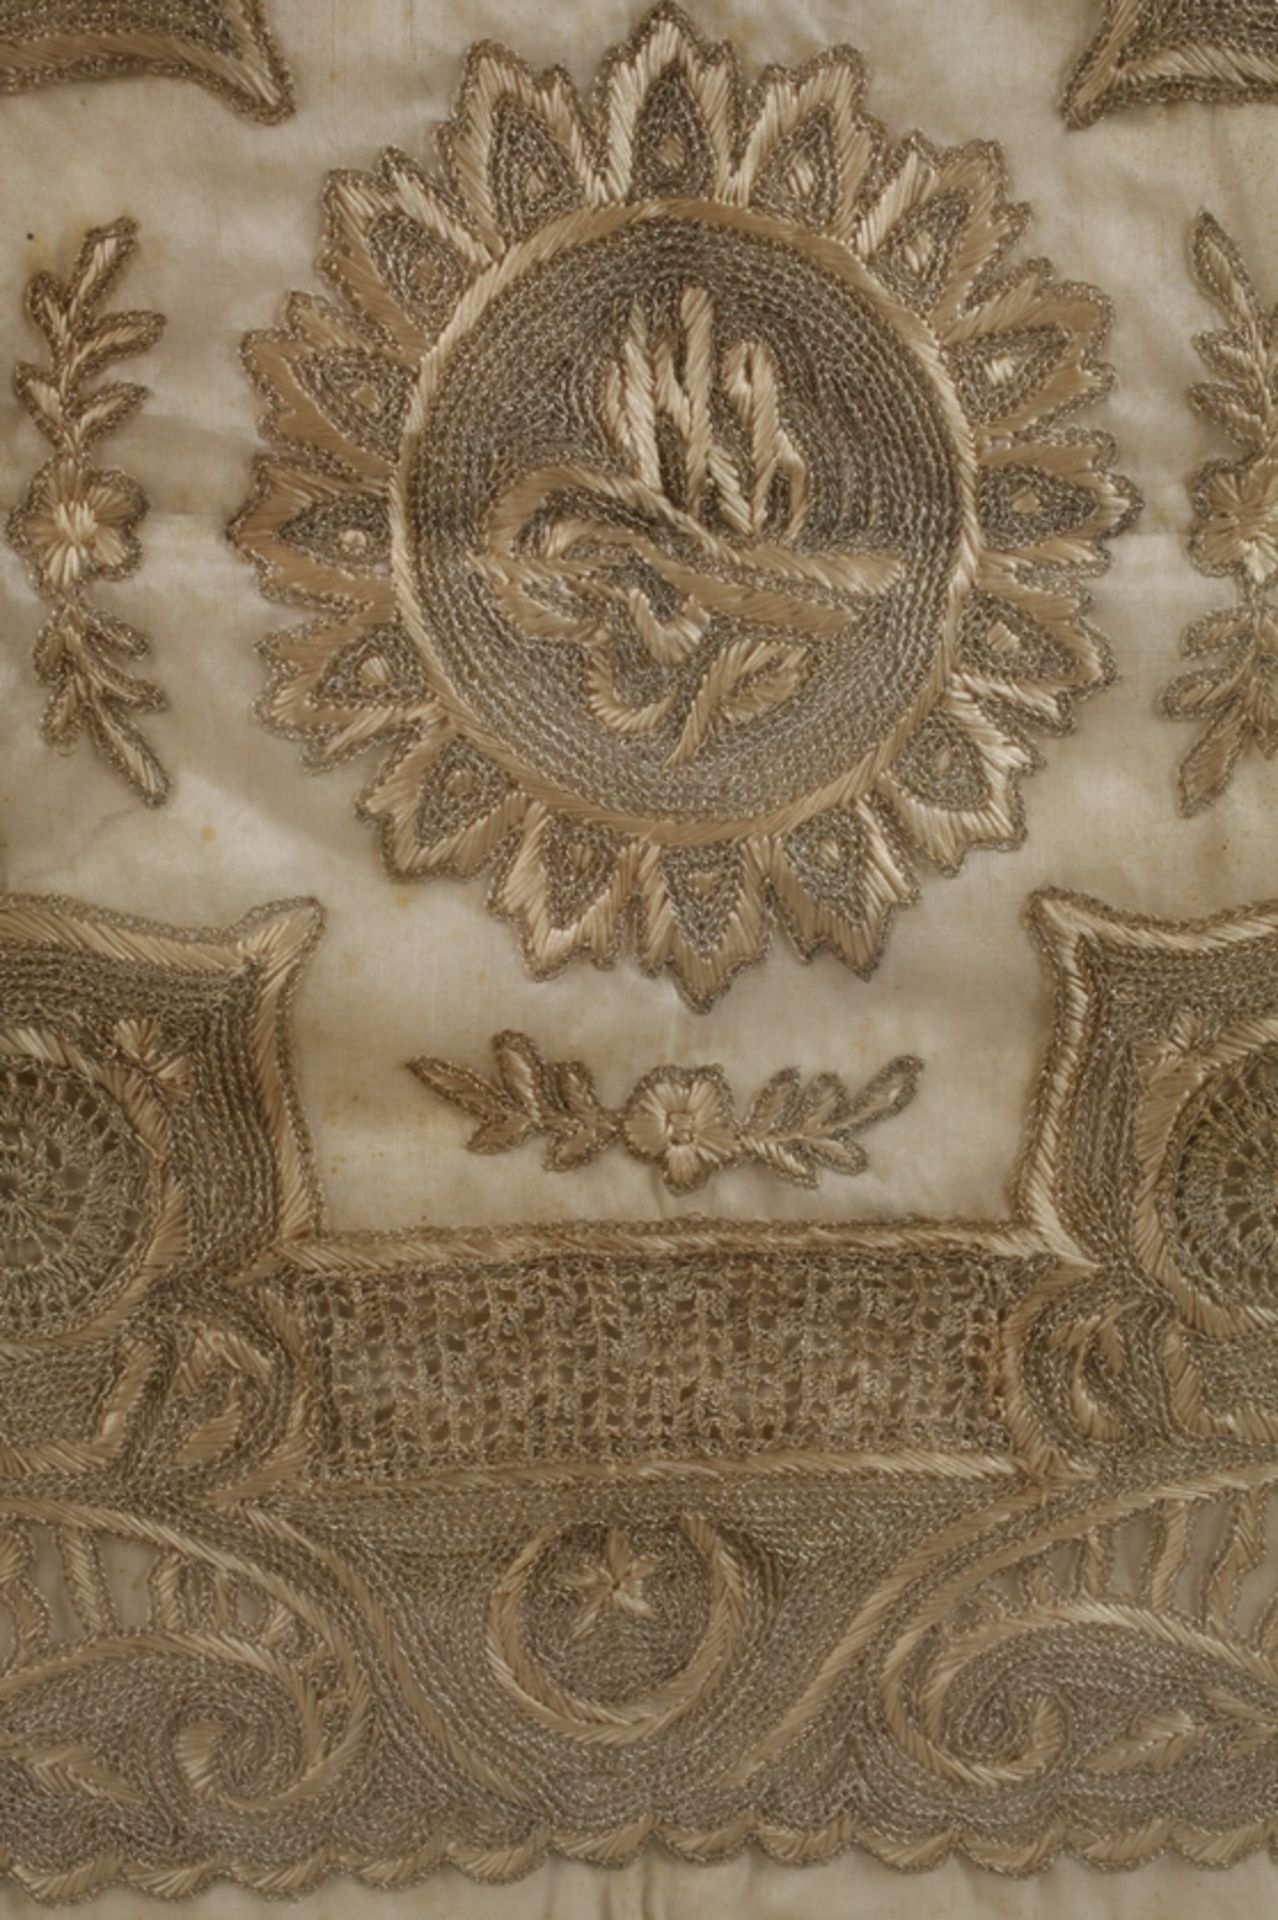 Decorative blanket with embroidery - Image 3 of 3